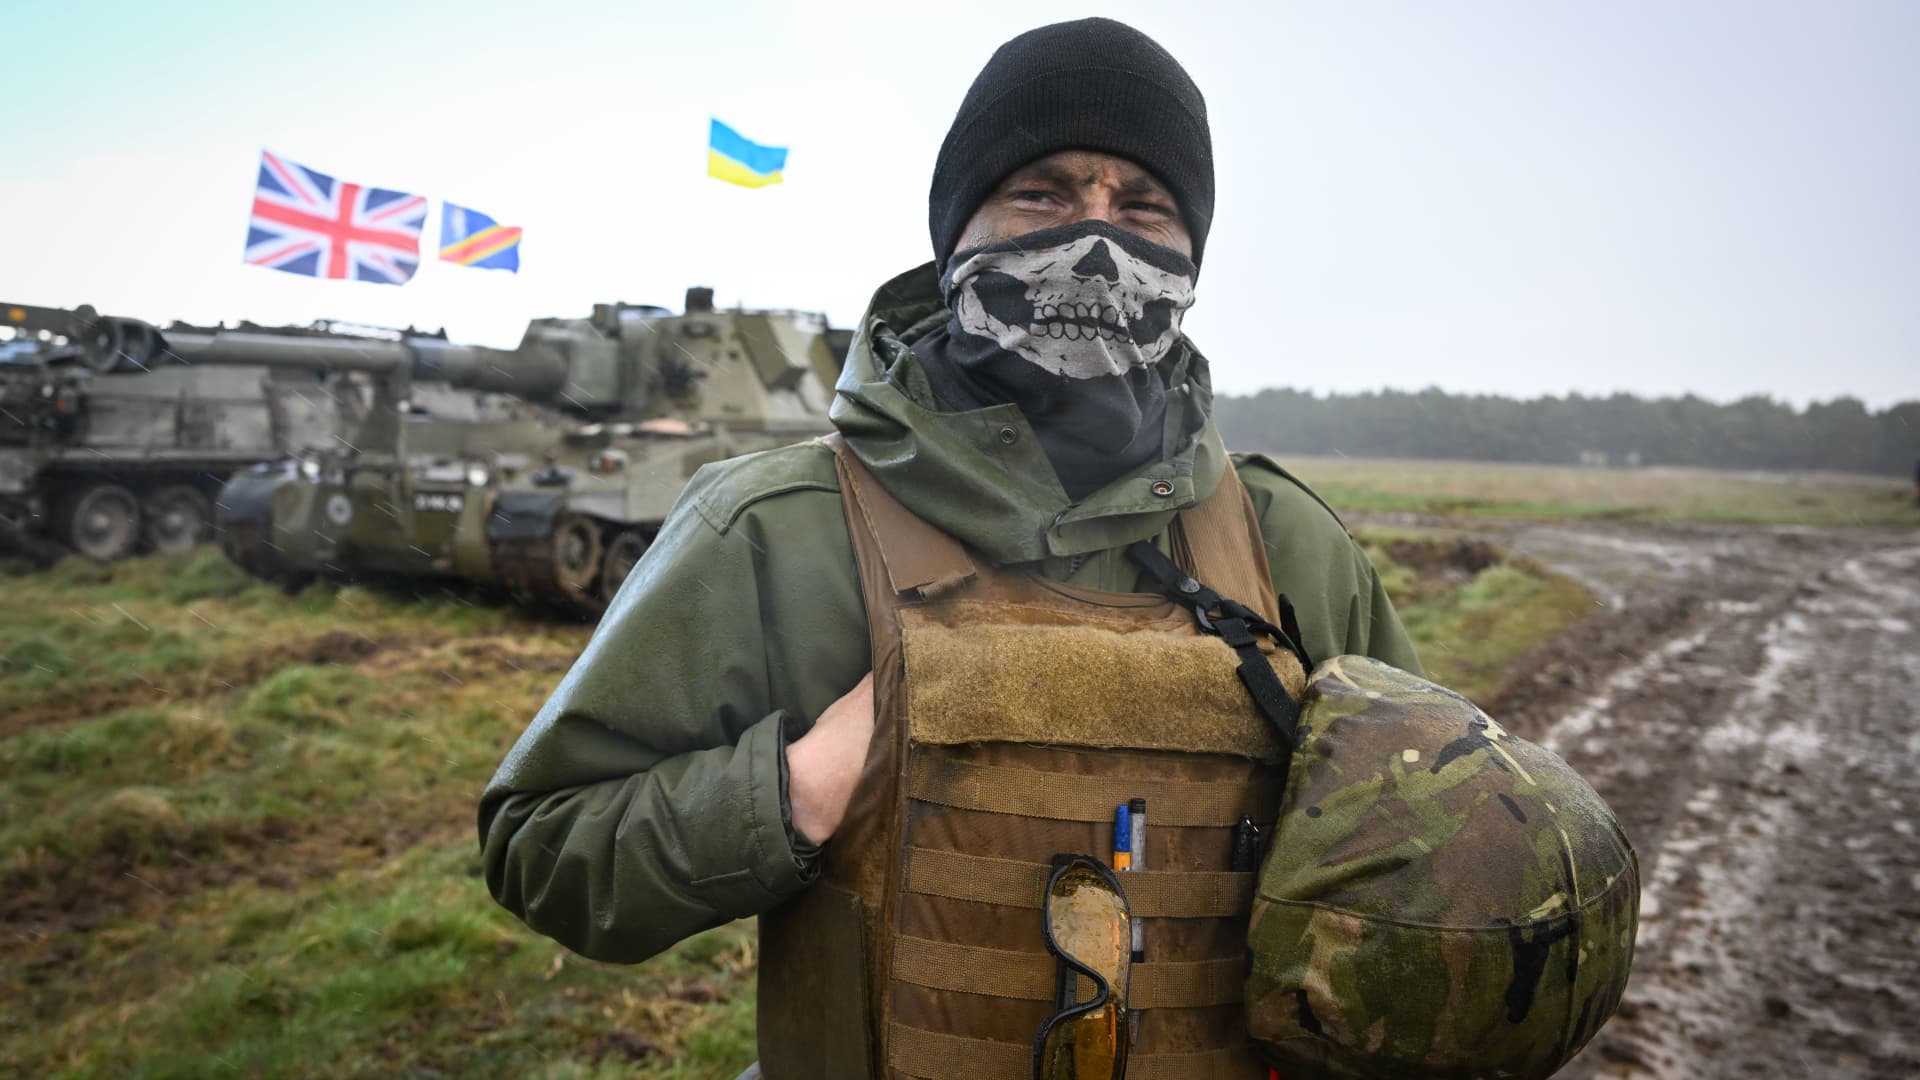 A Ukrainian soldier is seen with flags of Ukraine and the United Kingdom during their final training, on March 24, 2023 in South West, England. 